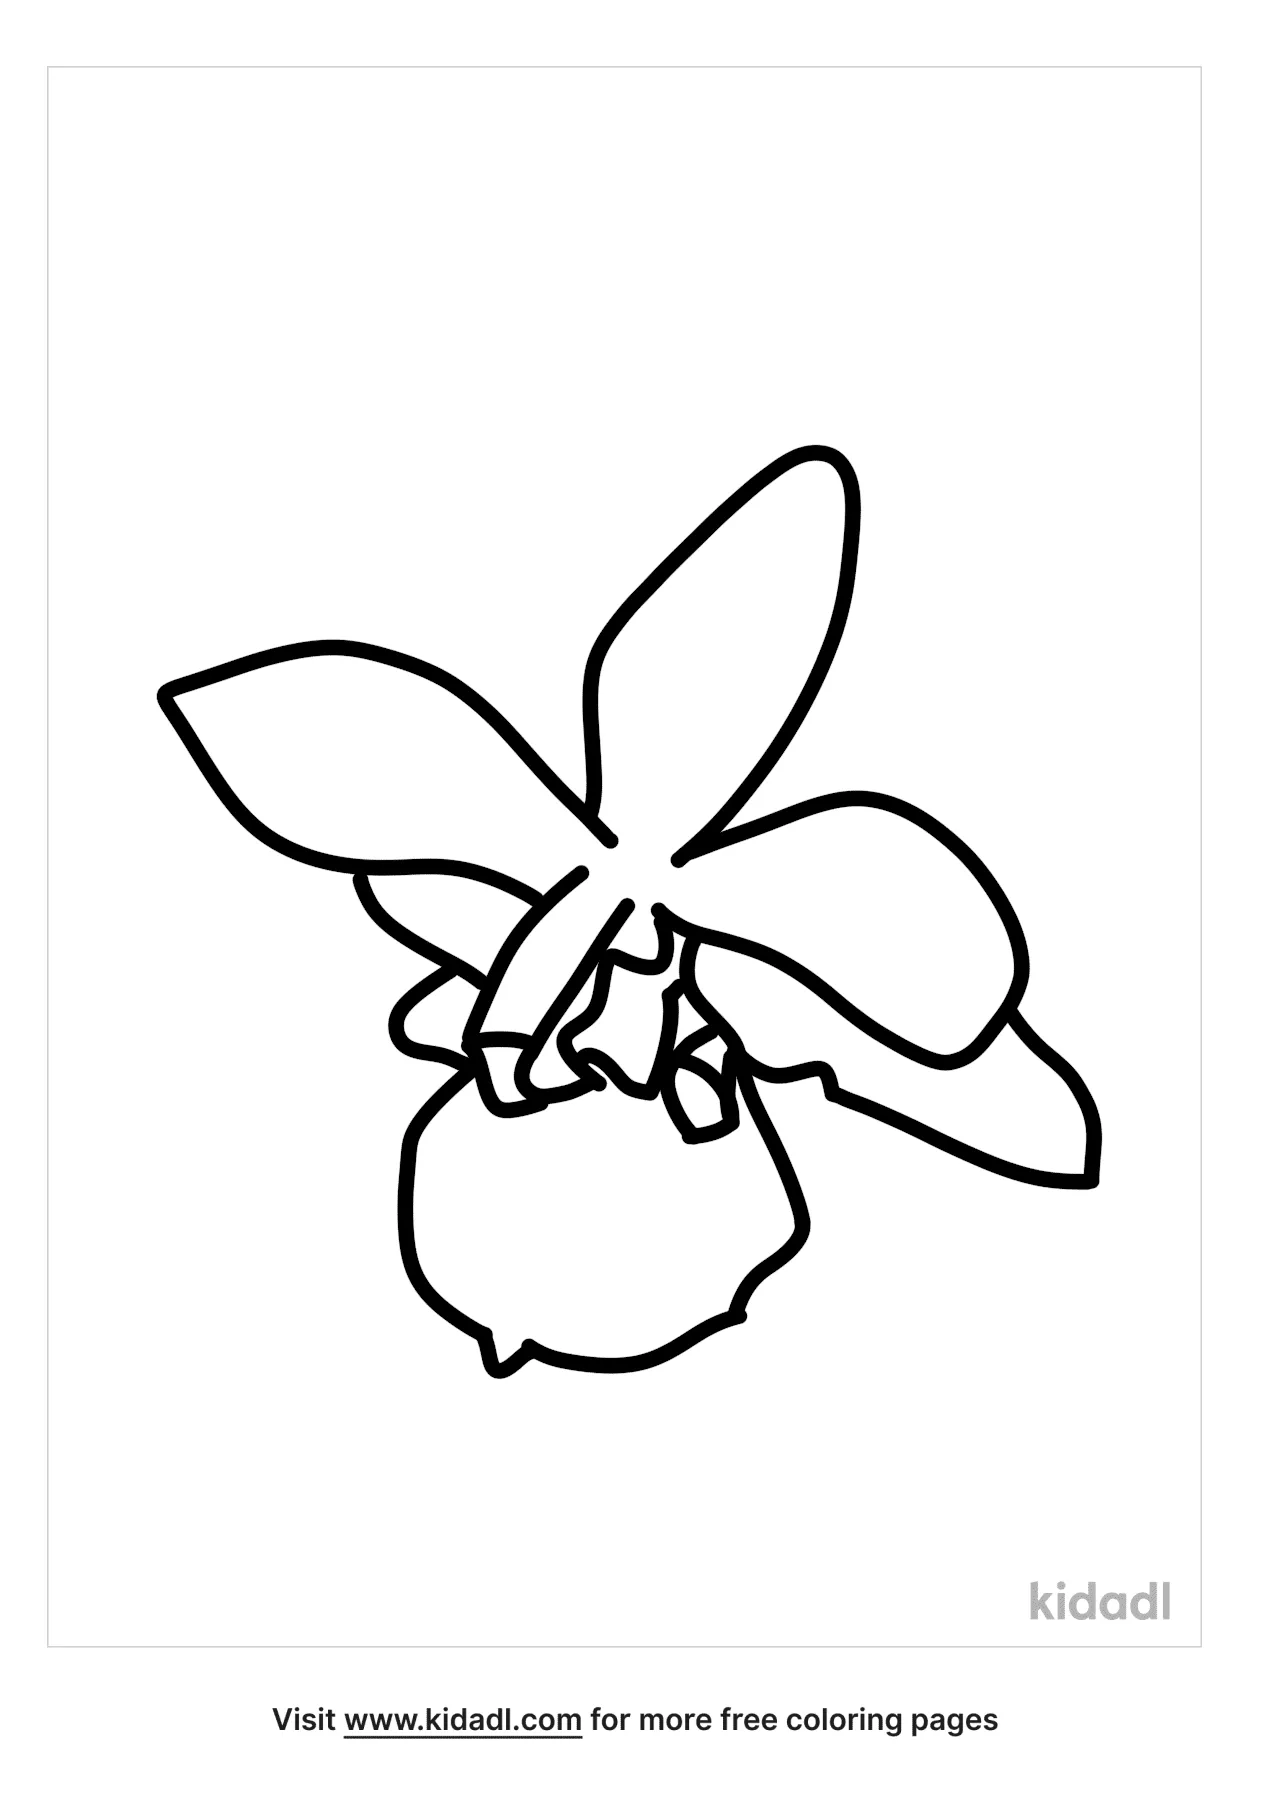 Free Butterfly Orchid Coloring Page | Coloring Page Printables | Kidadl